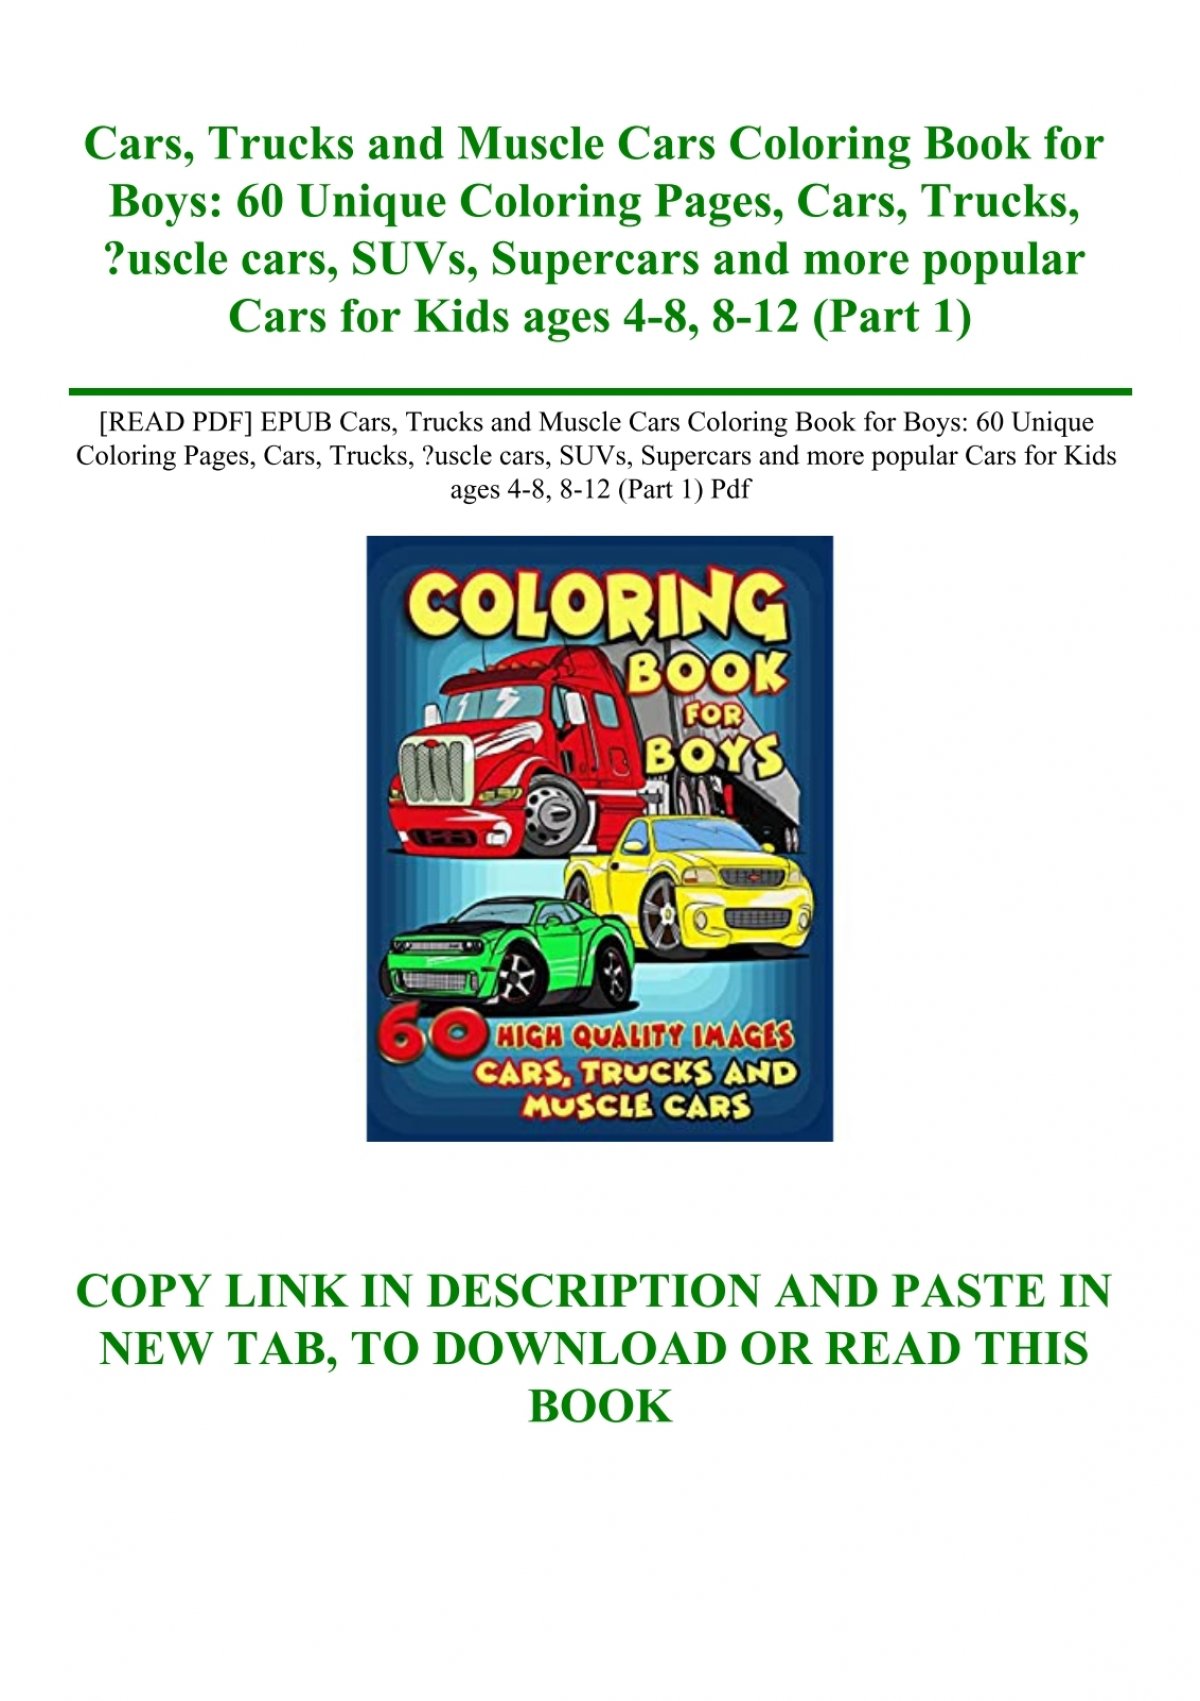 Download Read Pdf Epub Cars Trucks And Muscle Cars Coloring Book For Boys 60 Unique Coloring Pages Cars Trucks Uscle Cars Suvs Supercars And More Popular Cars For Kids Ages 4 8 8 12 Part 1 Pdf